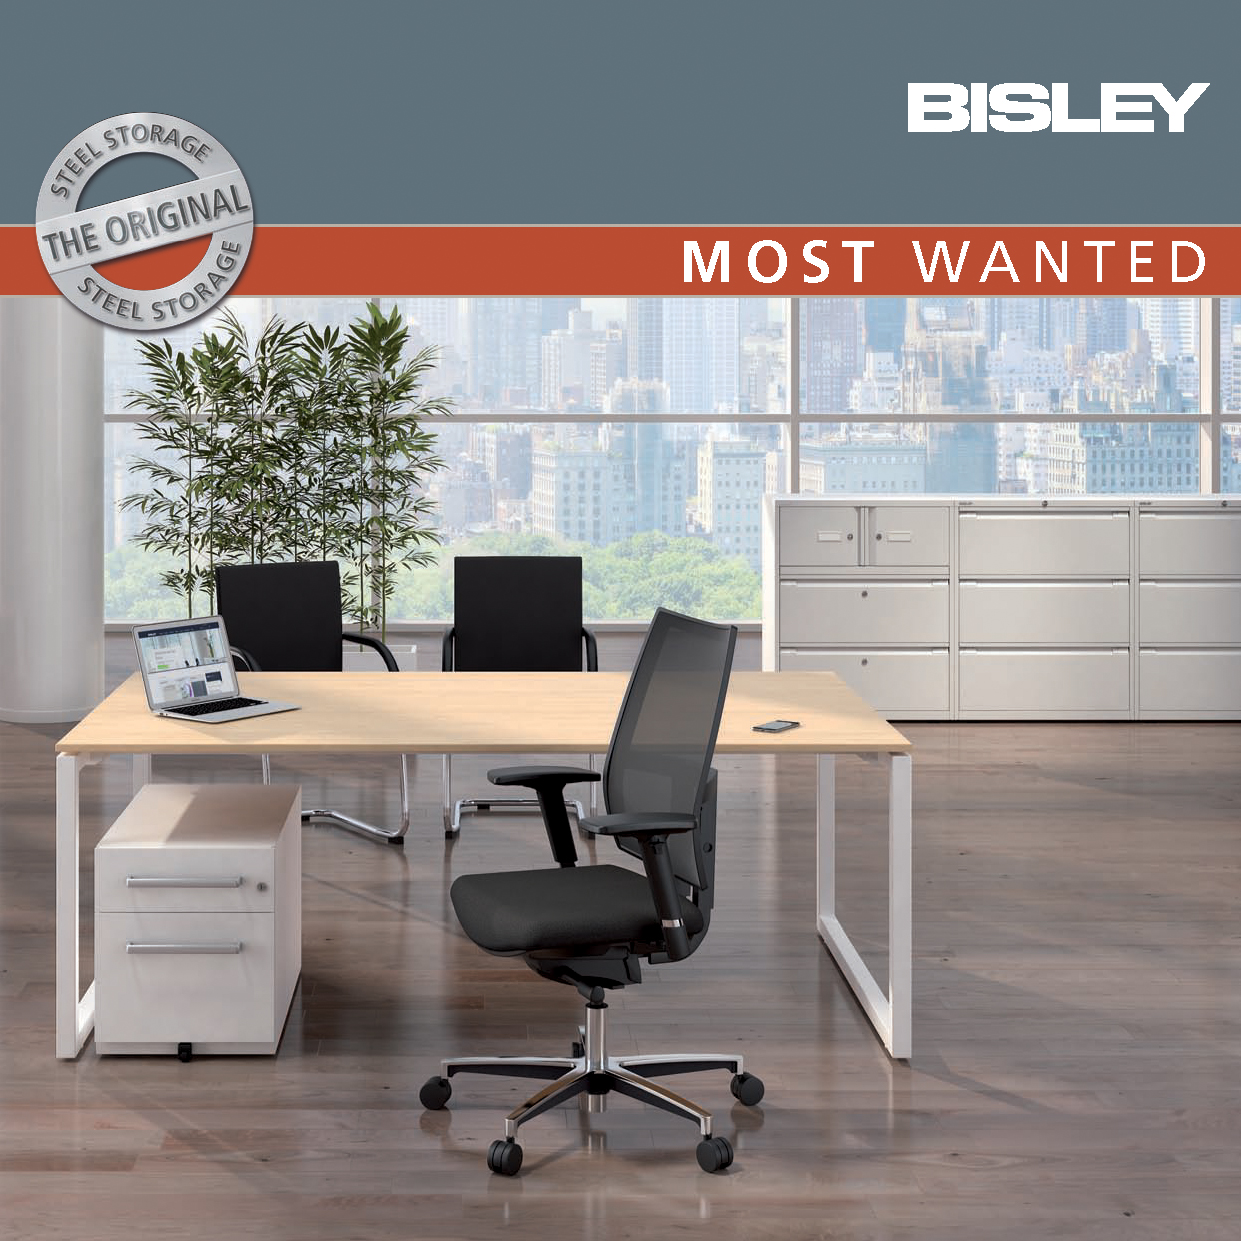 Bisley Most Wanted 2017